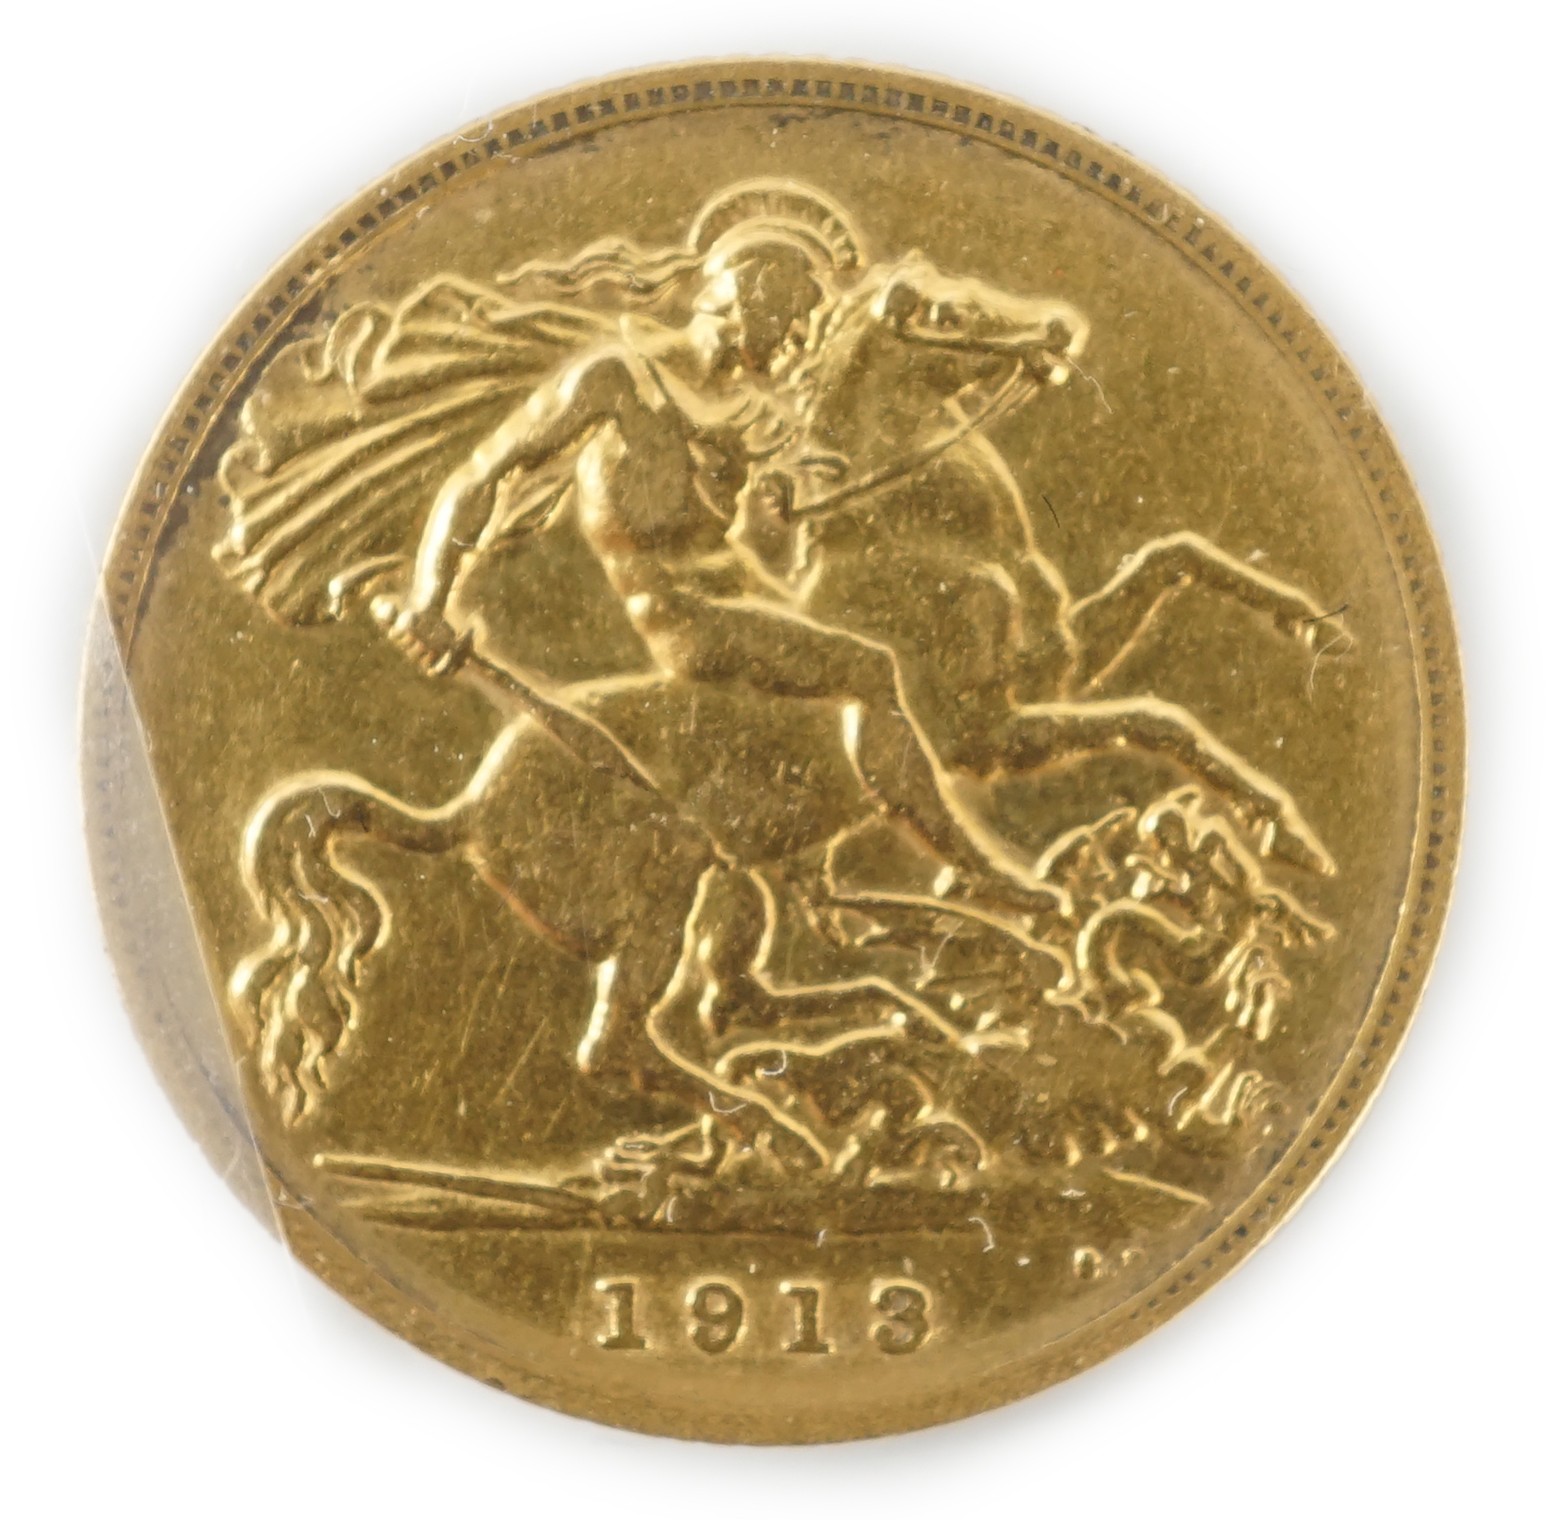 Two gold sovereigns, Victoria 1898M and Edward VII 1910, a George V half sovereign 1913 and a France gold 10 francs 1900 (test mark to portrait).